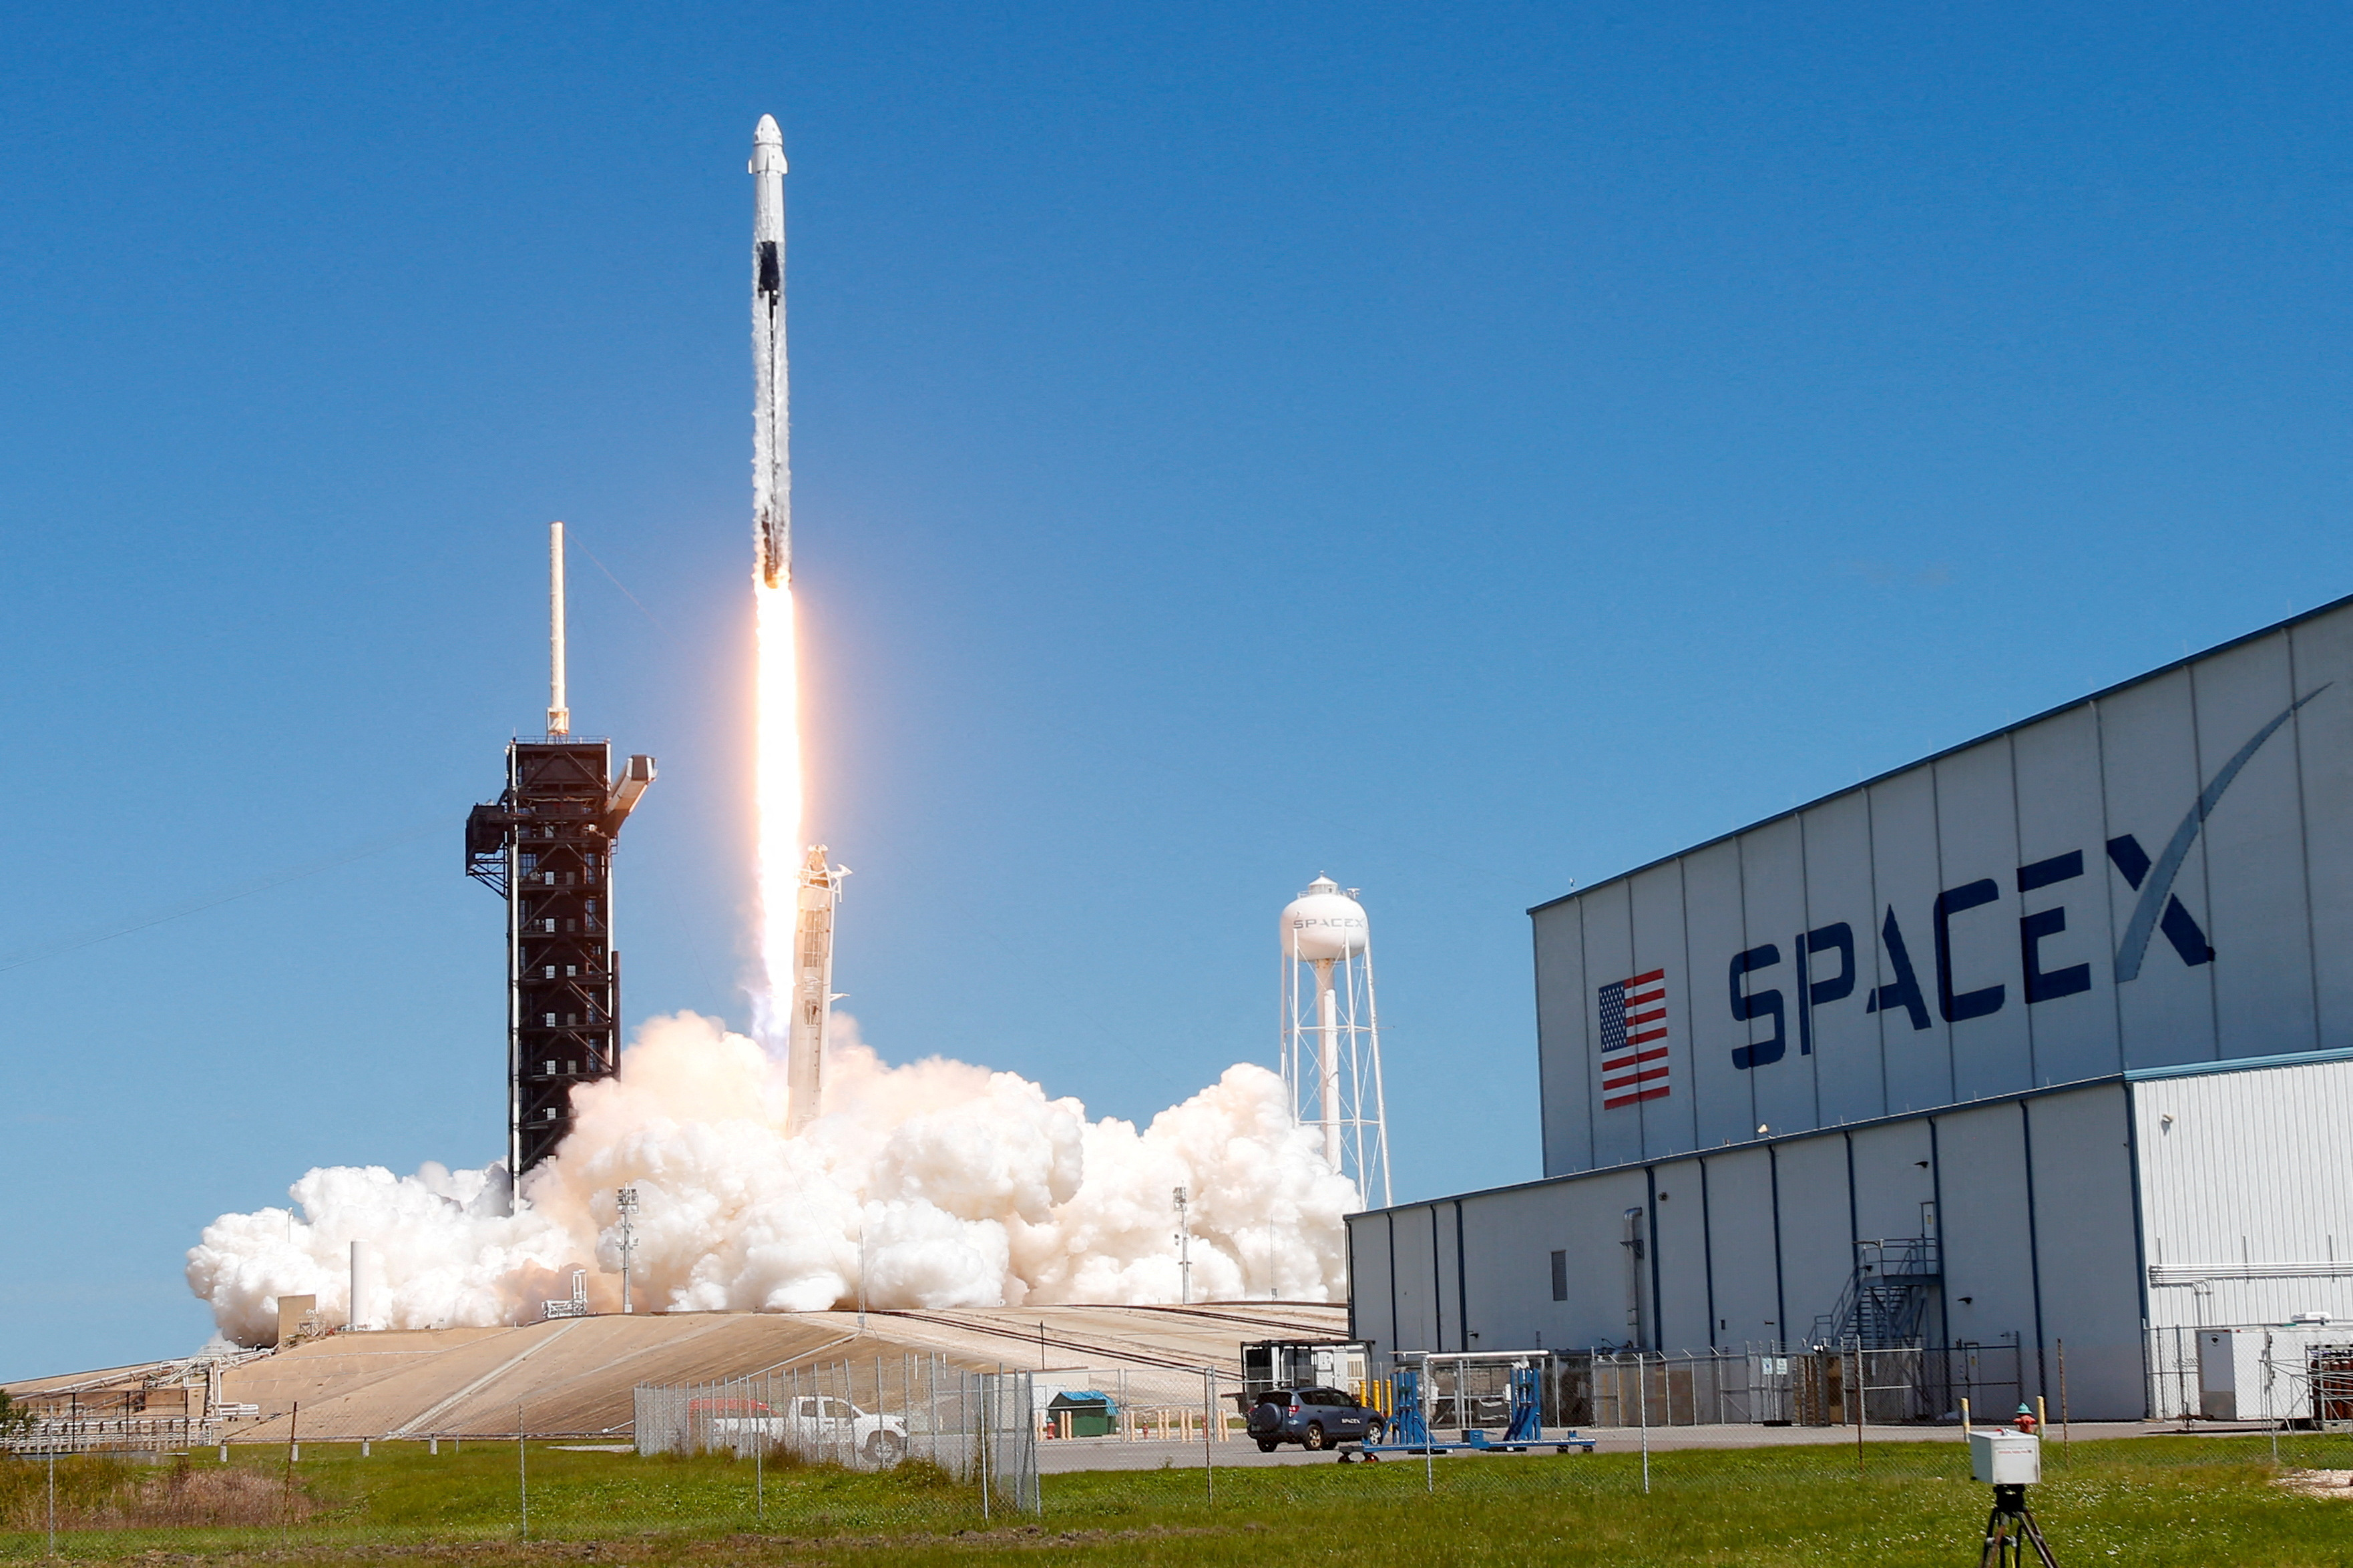 A SpaceX Falcon 9 rocket with the Dragon capsule launches from Pad-39A on the Crew 5 mission to carry four crew members to the International Space Station from NASA's Kennedy Space Center